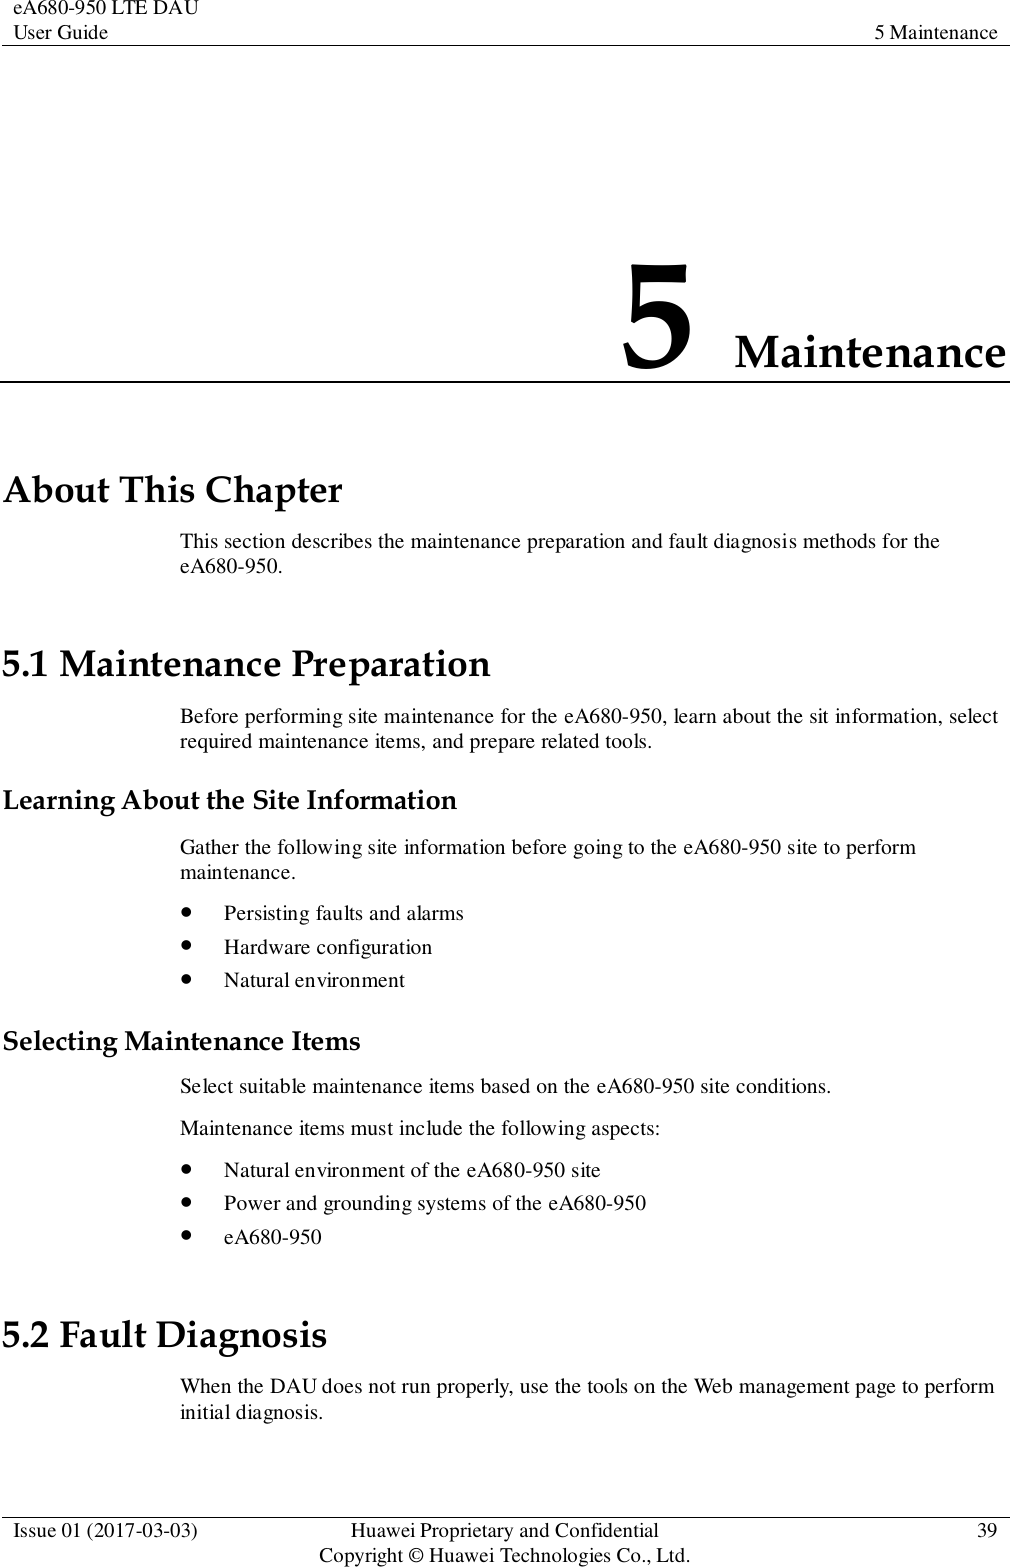 eA680-950 LTE DAU User Guide 5 Maintenance  Issue 01 (2017-03-03) Huawei Proprietary and Confidential                                     Copyright © Huawei Technologies Co., Ltd. 39  5 Maintenance About This Chapter This section describes the maintenance preparation and fault diagnosis methods for the eA680-950. 5.1 Maintenance Preparation Before performing site maintenance for the eA680-950, learn about the sit information, select required maintenance items, and prepare related tools.   Learning About the Site Information Gather the following site information before going to the eA680-950 site to perform maintenance.    Persisting faults and alarms  Hardware configuration  Natural environment Selecting Maintenance Items Select suitable maintenance items based on the eA680-950 site conditions.   Maintenance items must include the following aspects:  Natural environment of the eA680-950 site  Power and grounding systems of the eA680-950  eA680-950 5.2 Fault Diagnosis When the DAU does not run properly, use the tools on the Web management page to perform initial diagnosis. 